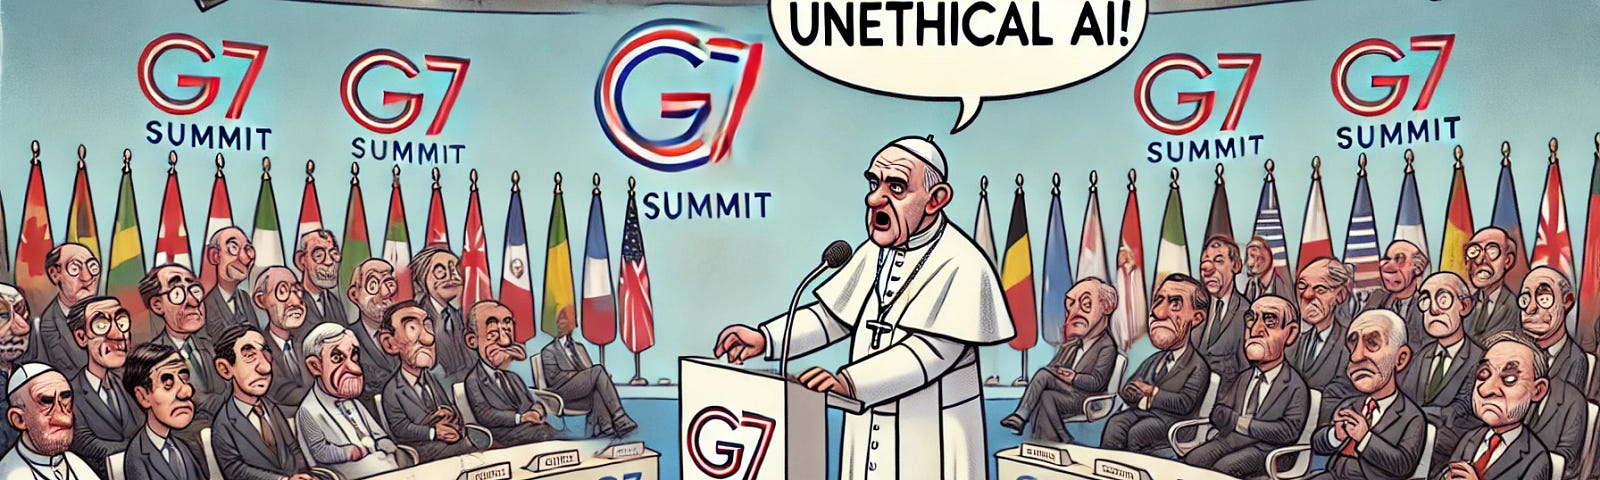 A cartoon of the Pope standing on a stage at the G7 summit, addressing an audience of world leaders. The Pope is holding a microphone with a severe expression, gesturing with one hand as he speaks. The audience includes caricatures of world leaders who look attentive and concerned. The backdrop features flags of the G7 nations and a G7 summit banner. A speech bubble next to the Pope says, “DOWN WITH UNETHICAL AI!” The setting is a large, modern conference hall with a high-tech atmosphere.